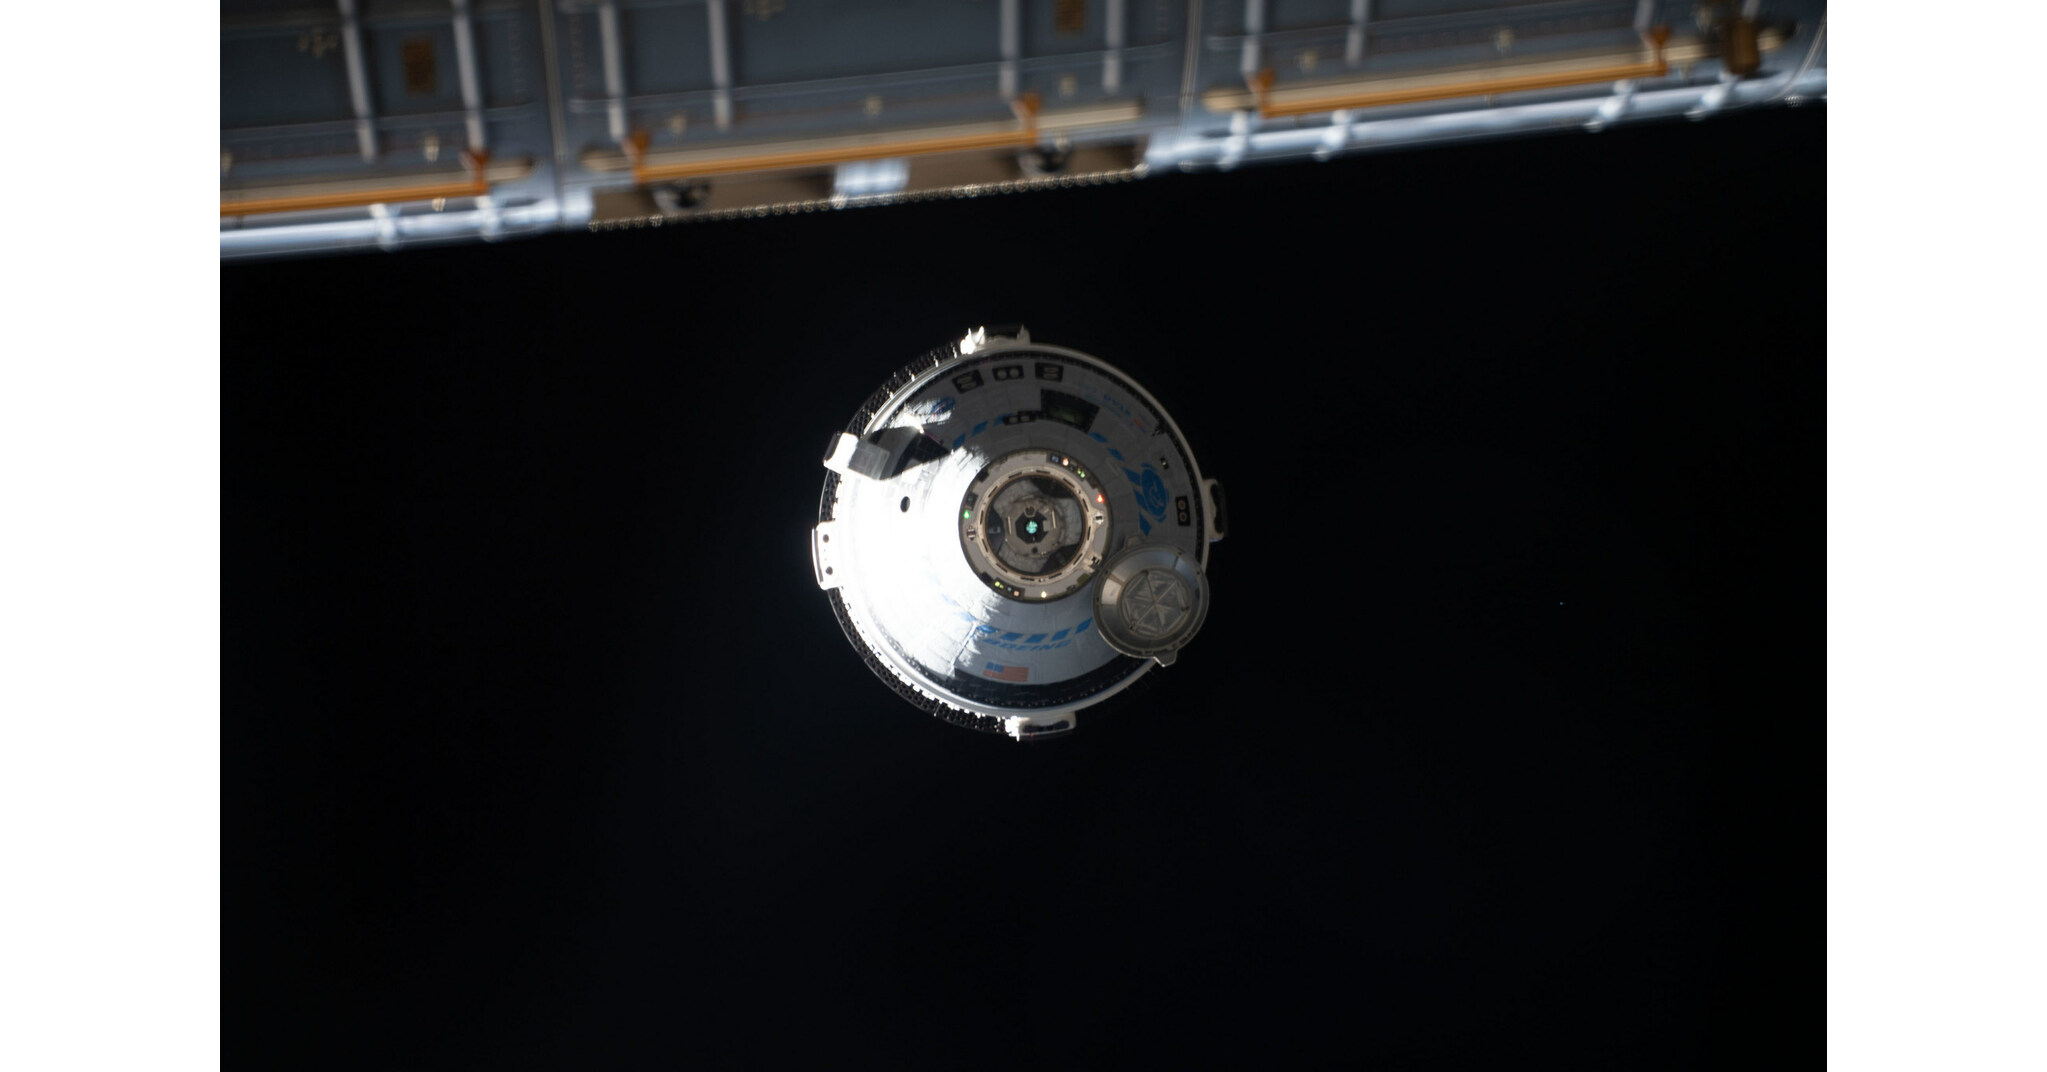 NASA Sets Coverage for Boeing Starliner First Crewed Launch, Docking